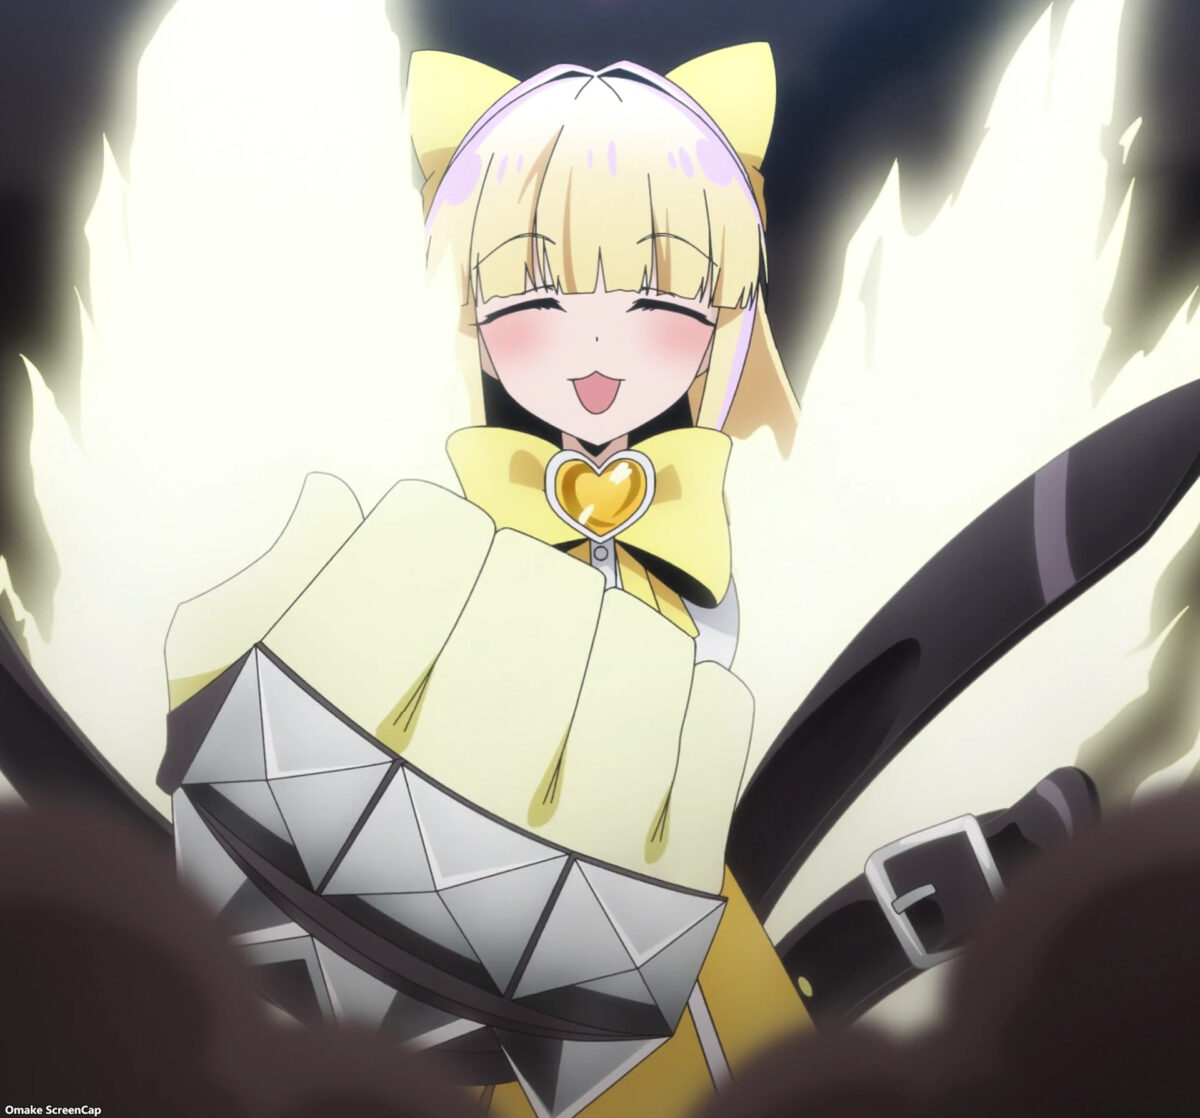 Gushing Over Magical Girls Episode 4 Magia Sulfur Flexes Fist